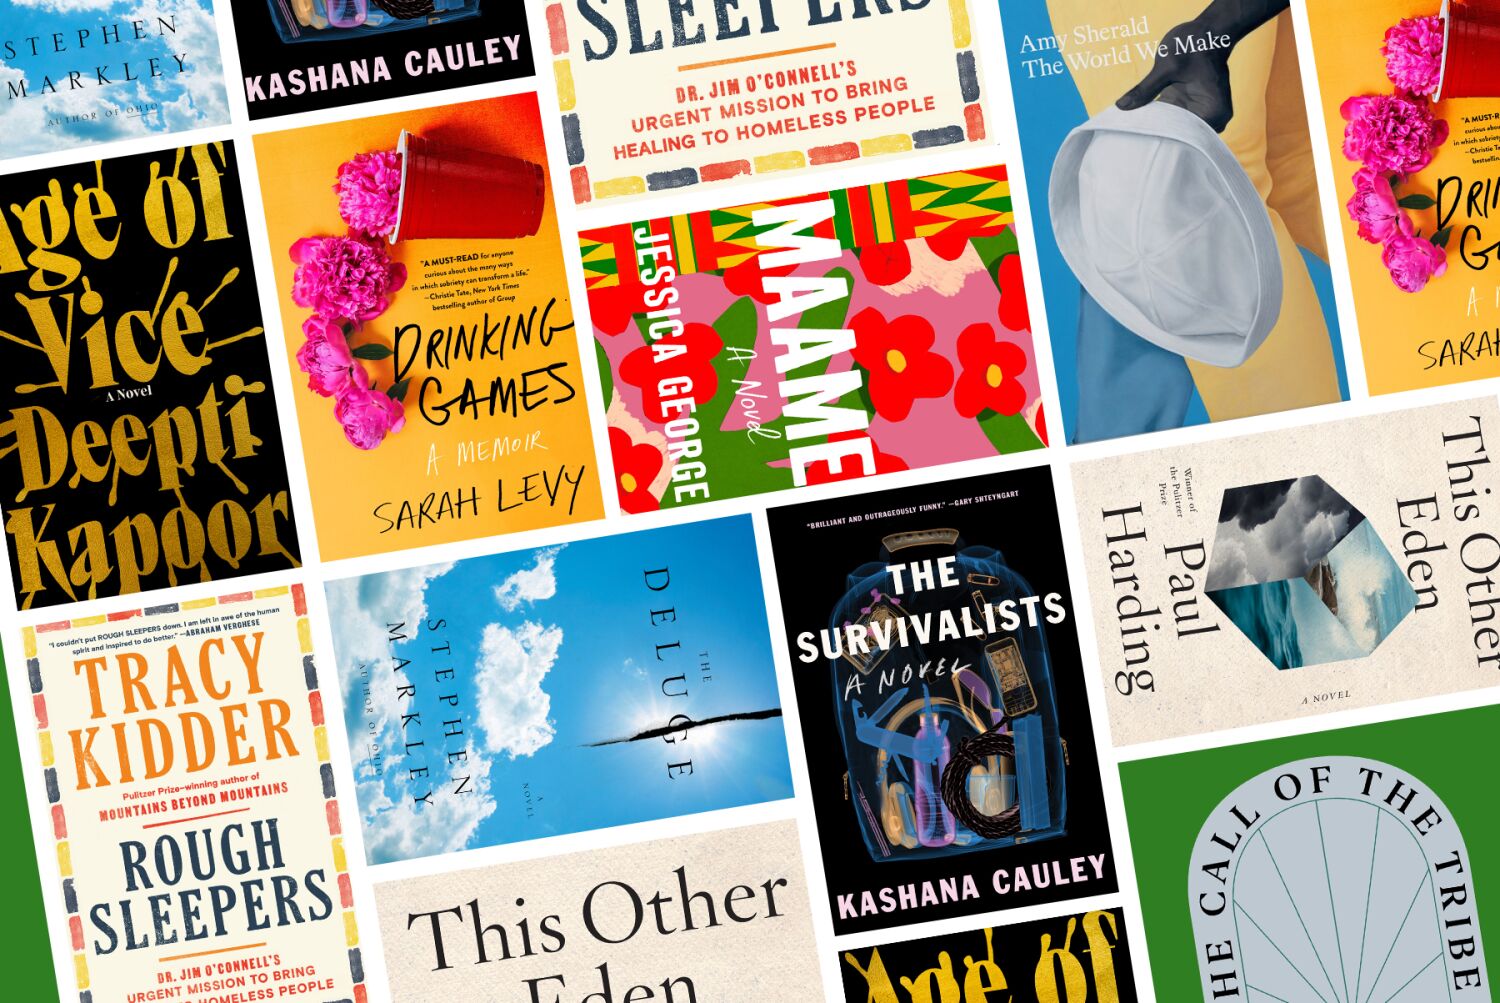 10 books to add to your reading list in January